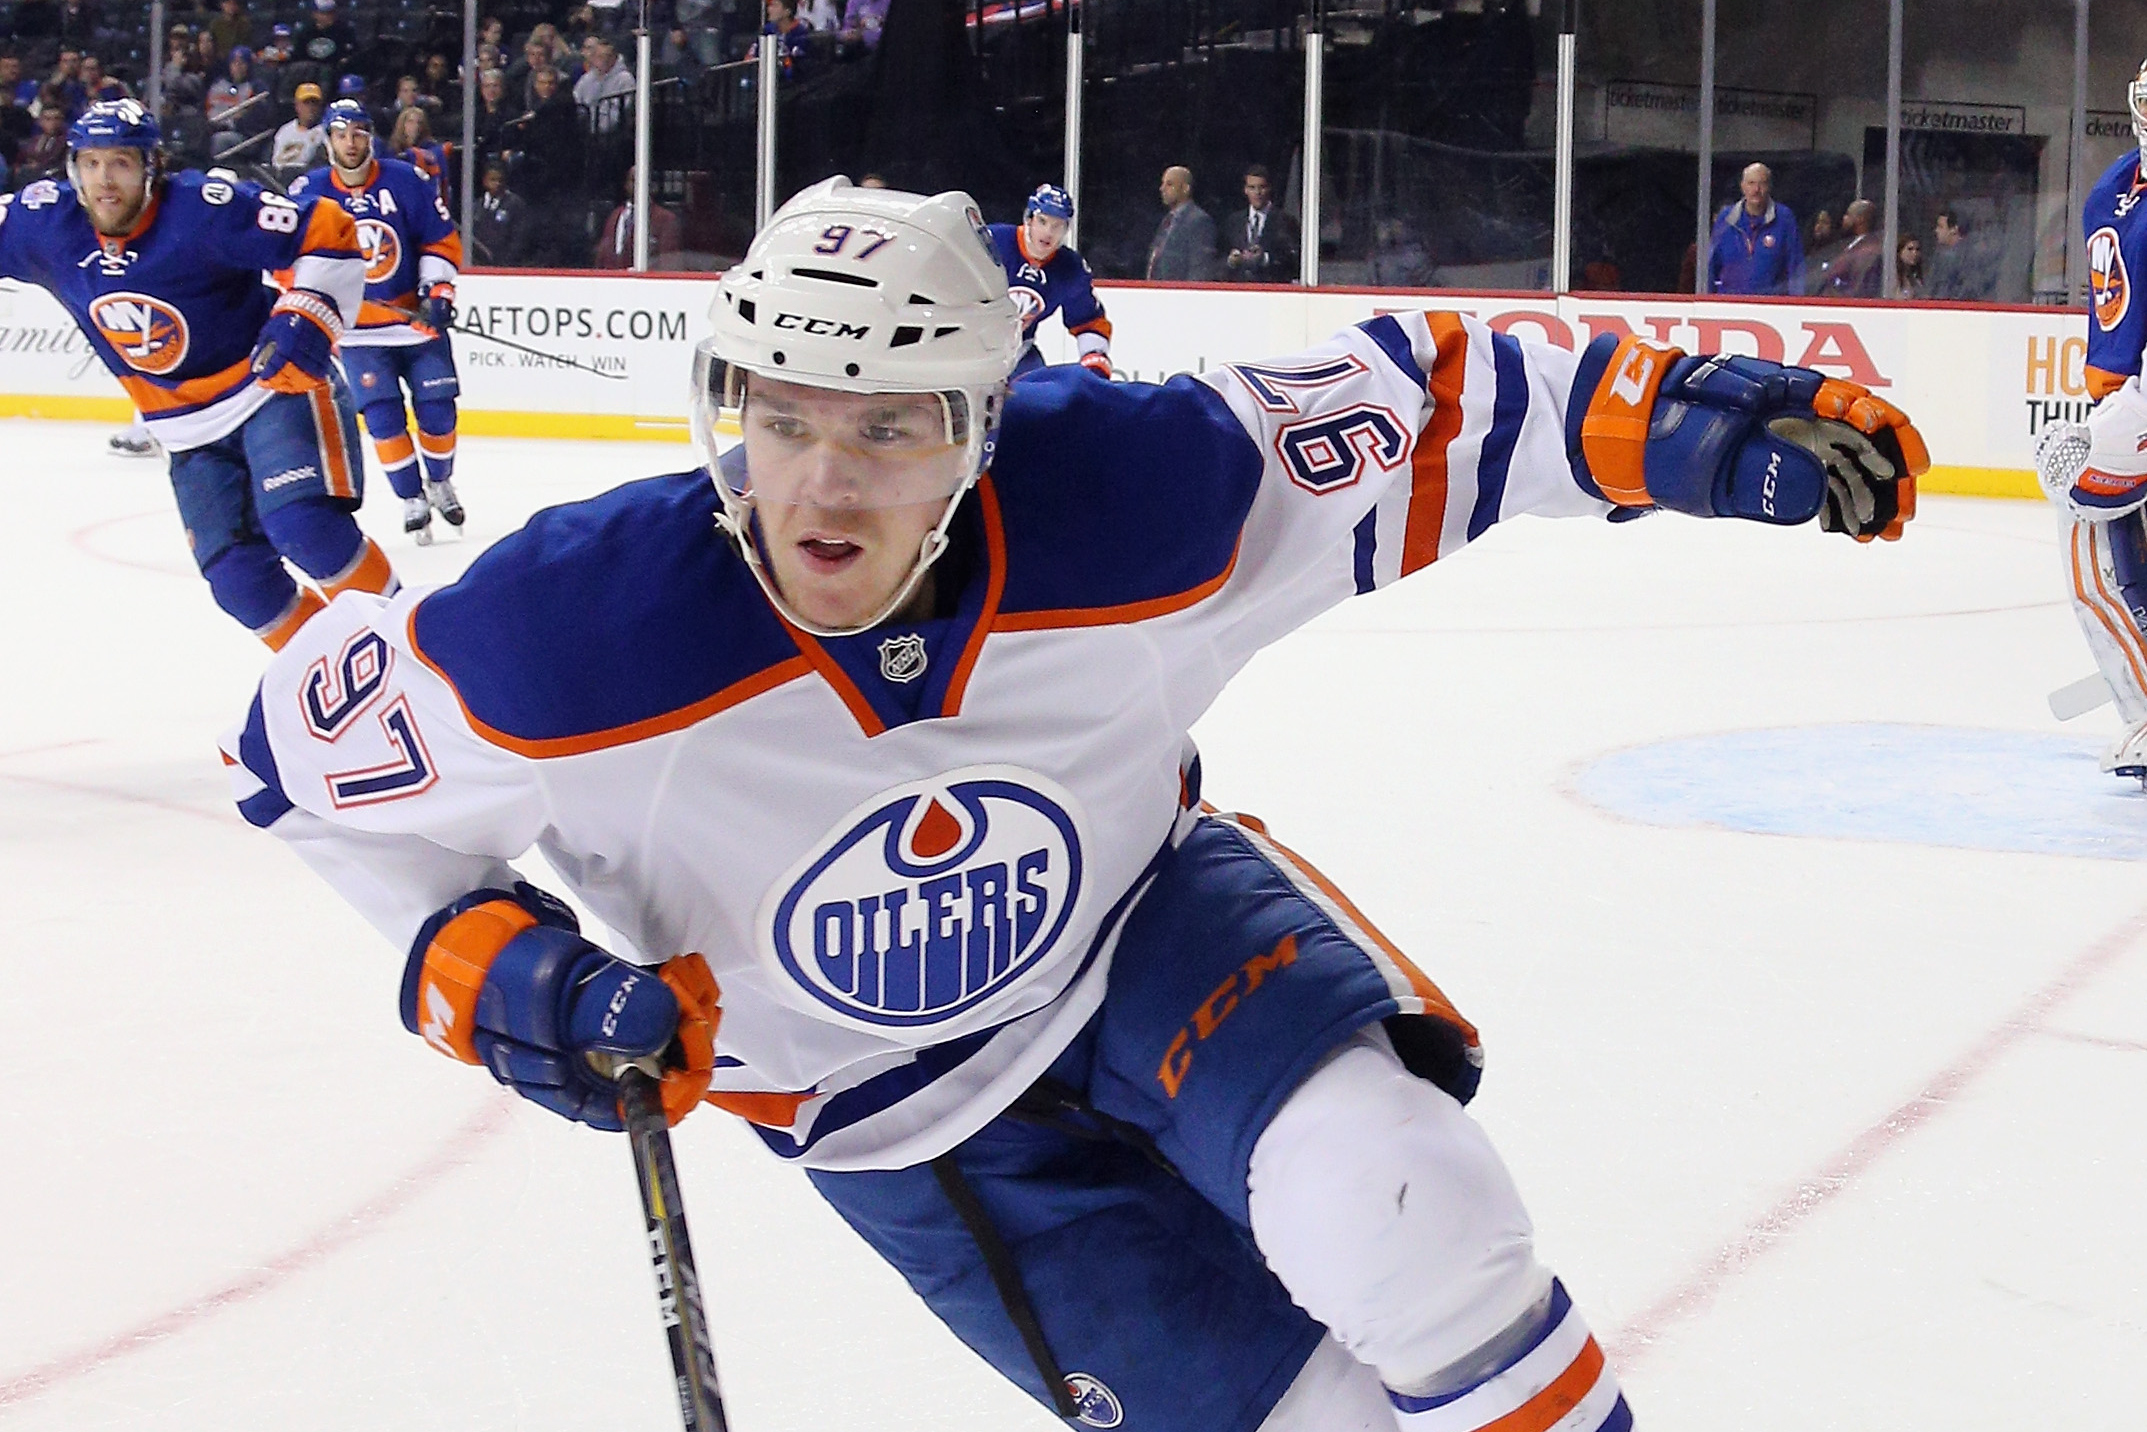 Connor McDavid's skill, poise make him player NHL has been